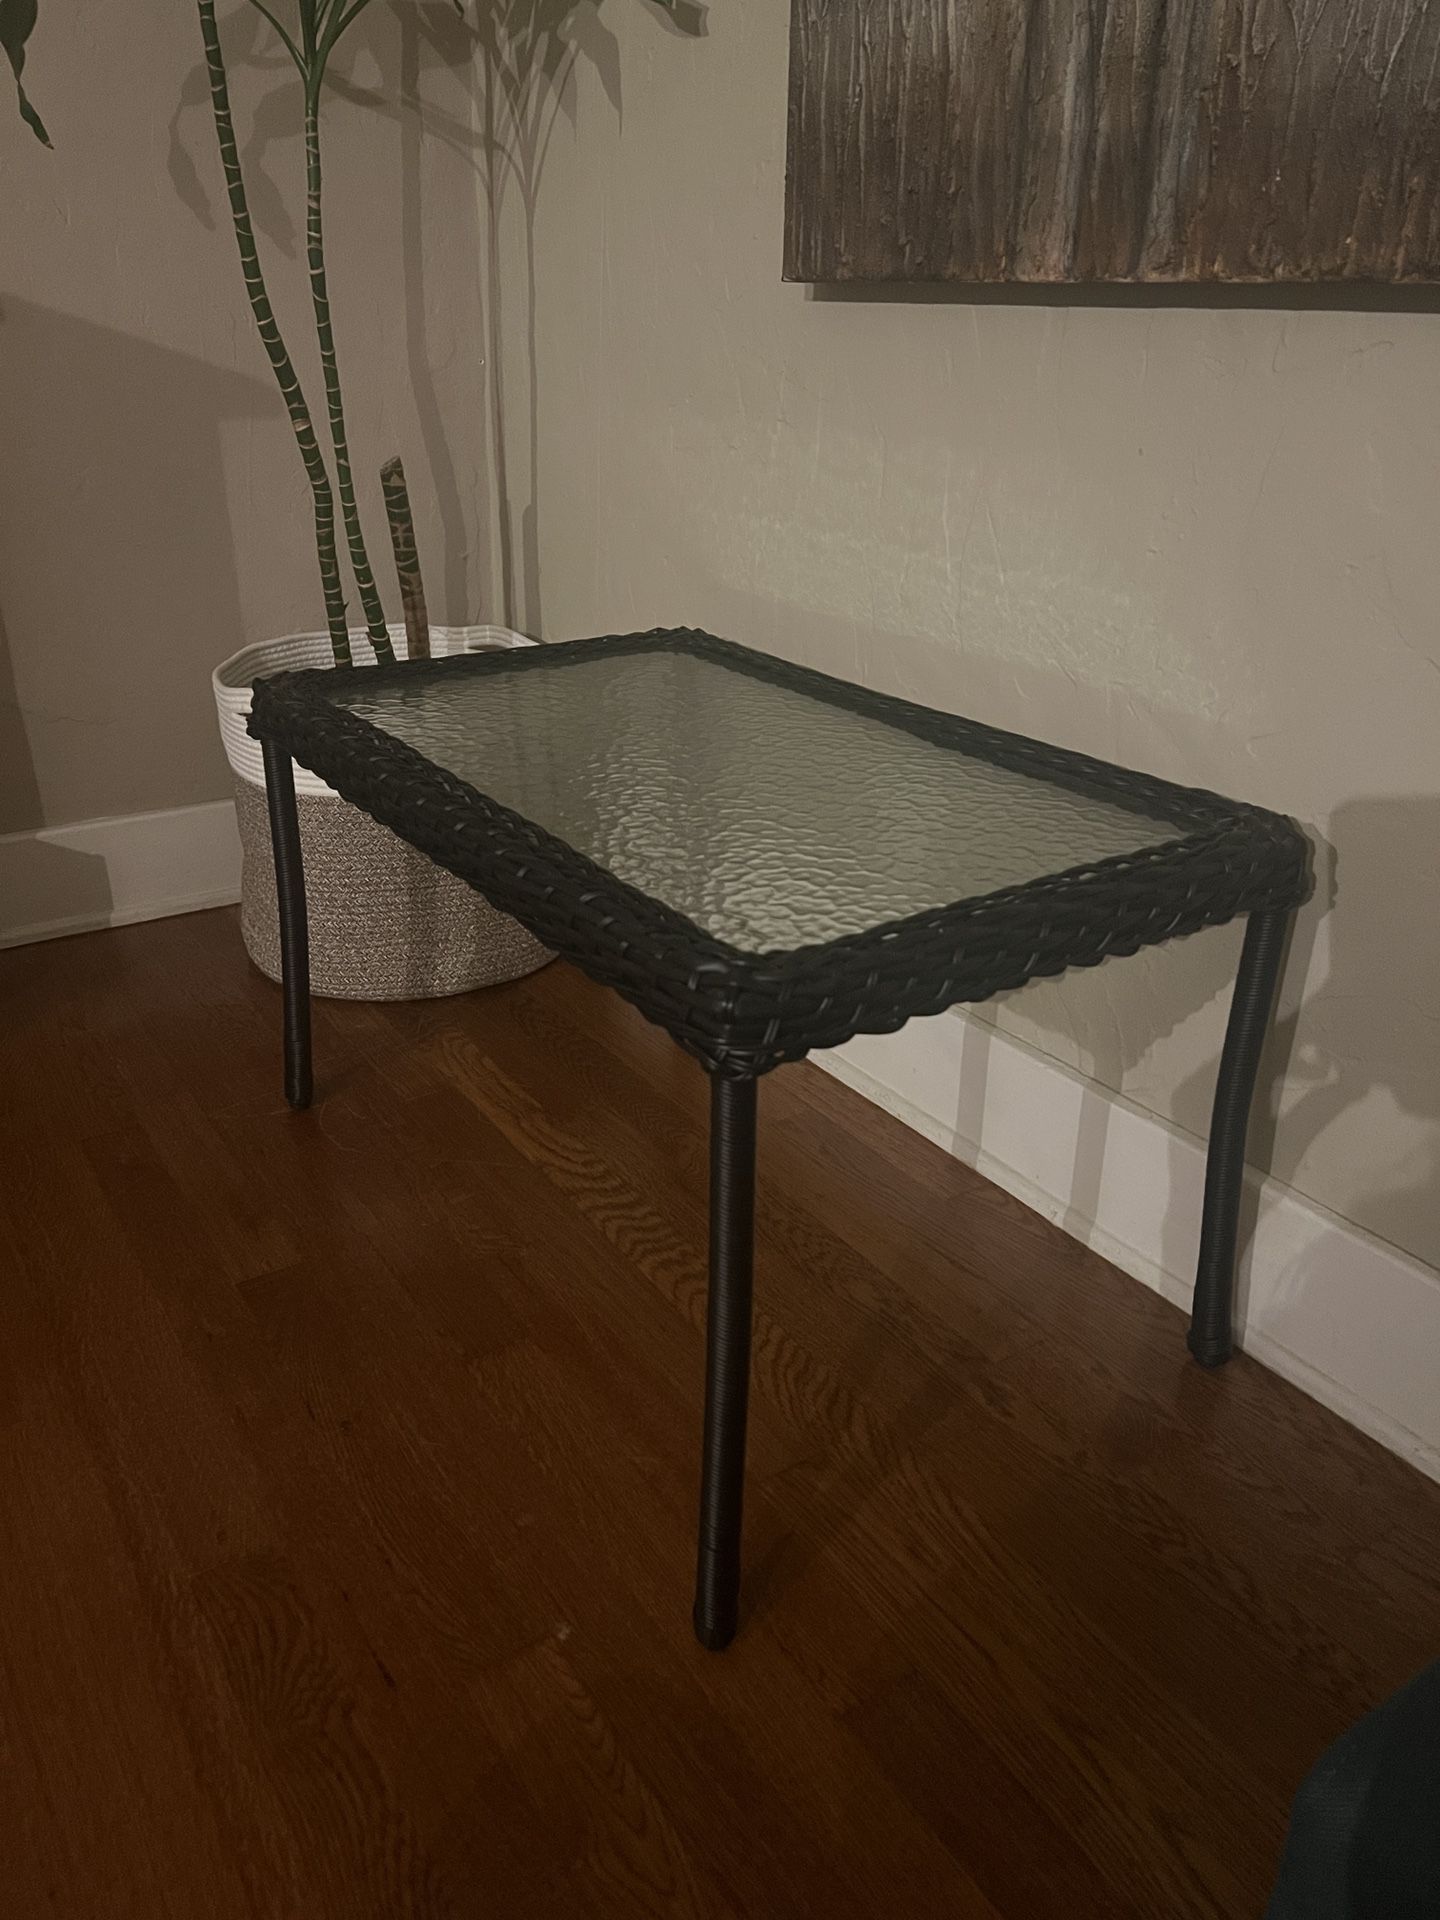 Woven Wicker And Tempered Glass Indoor/outdoor Coffee Table